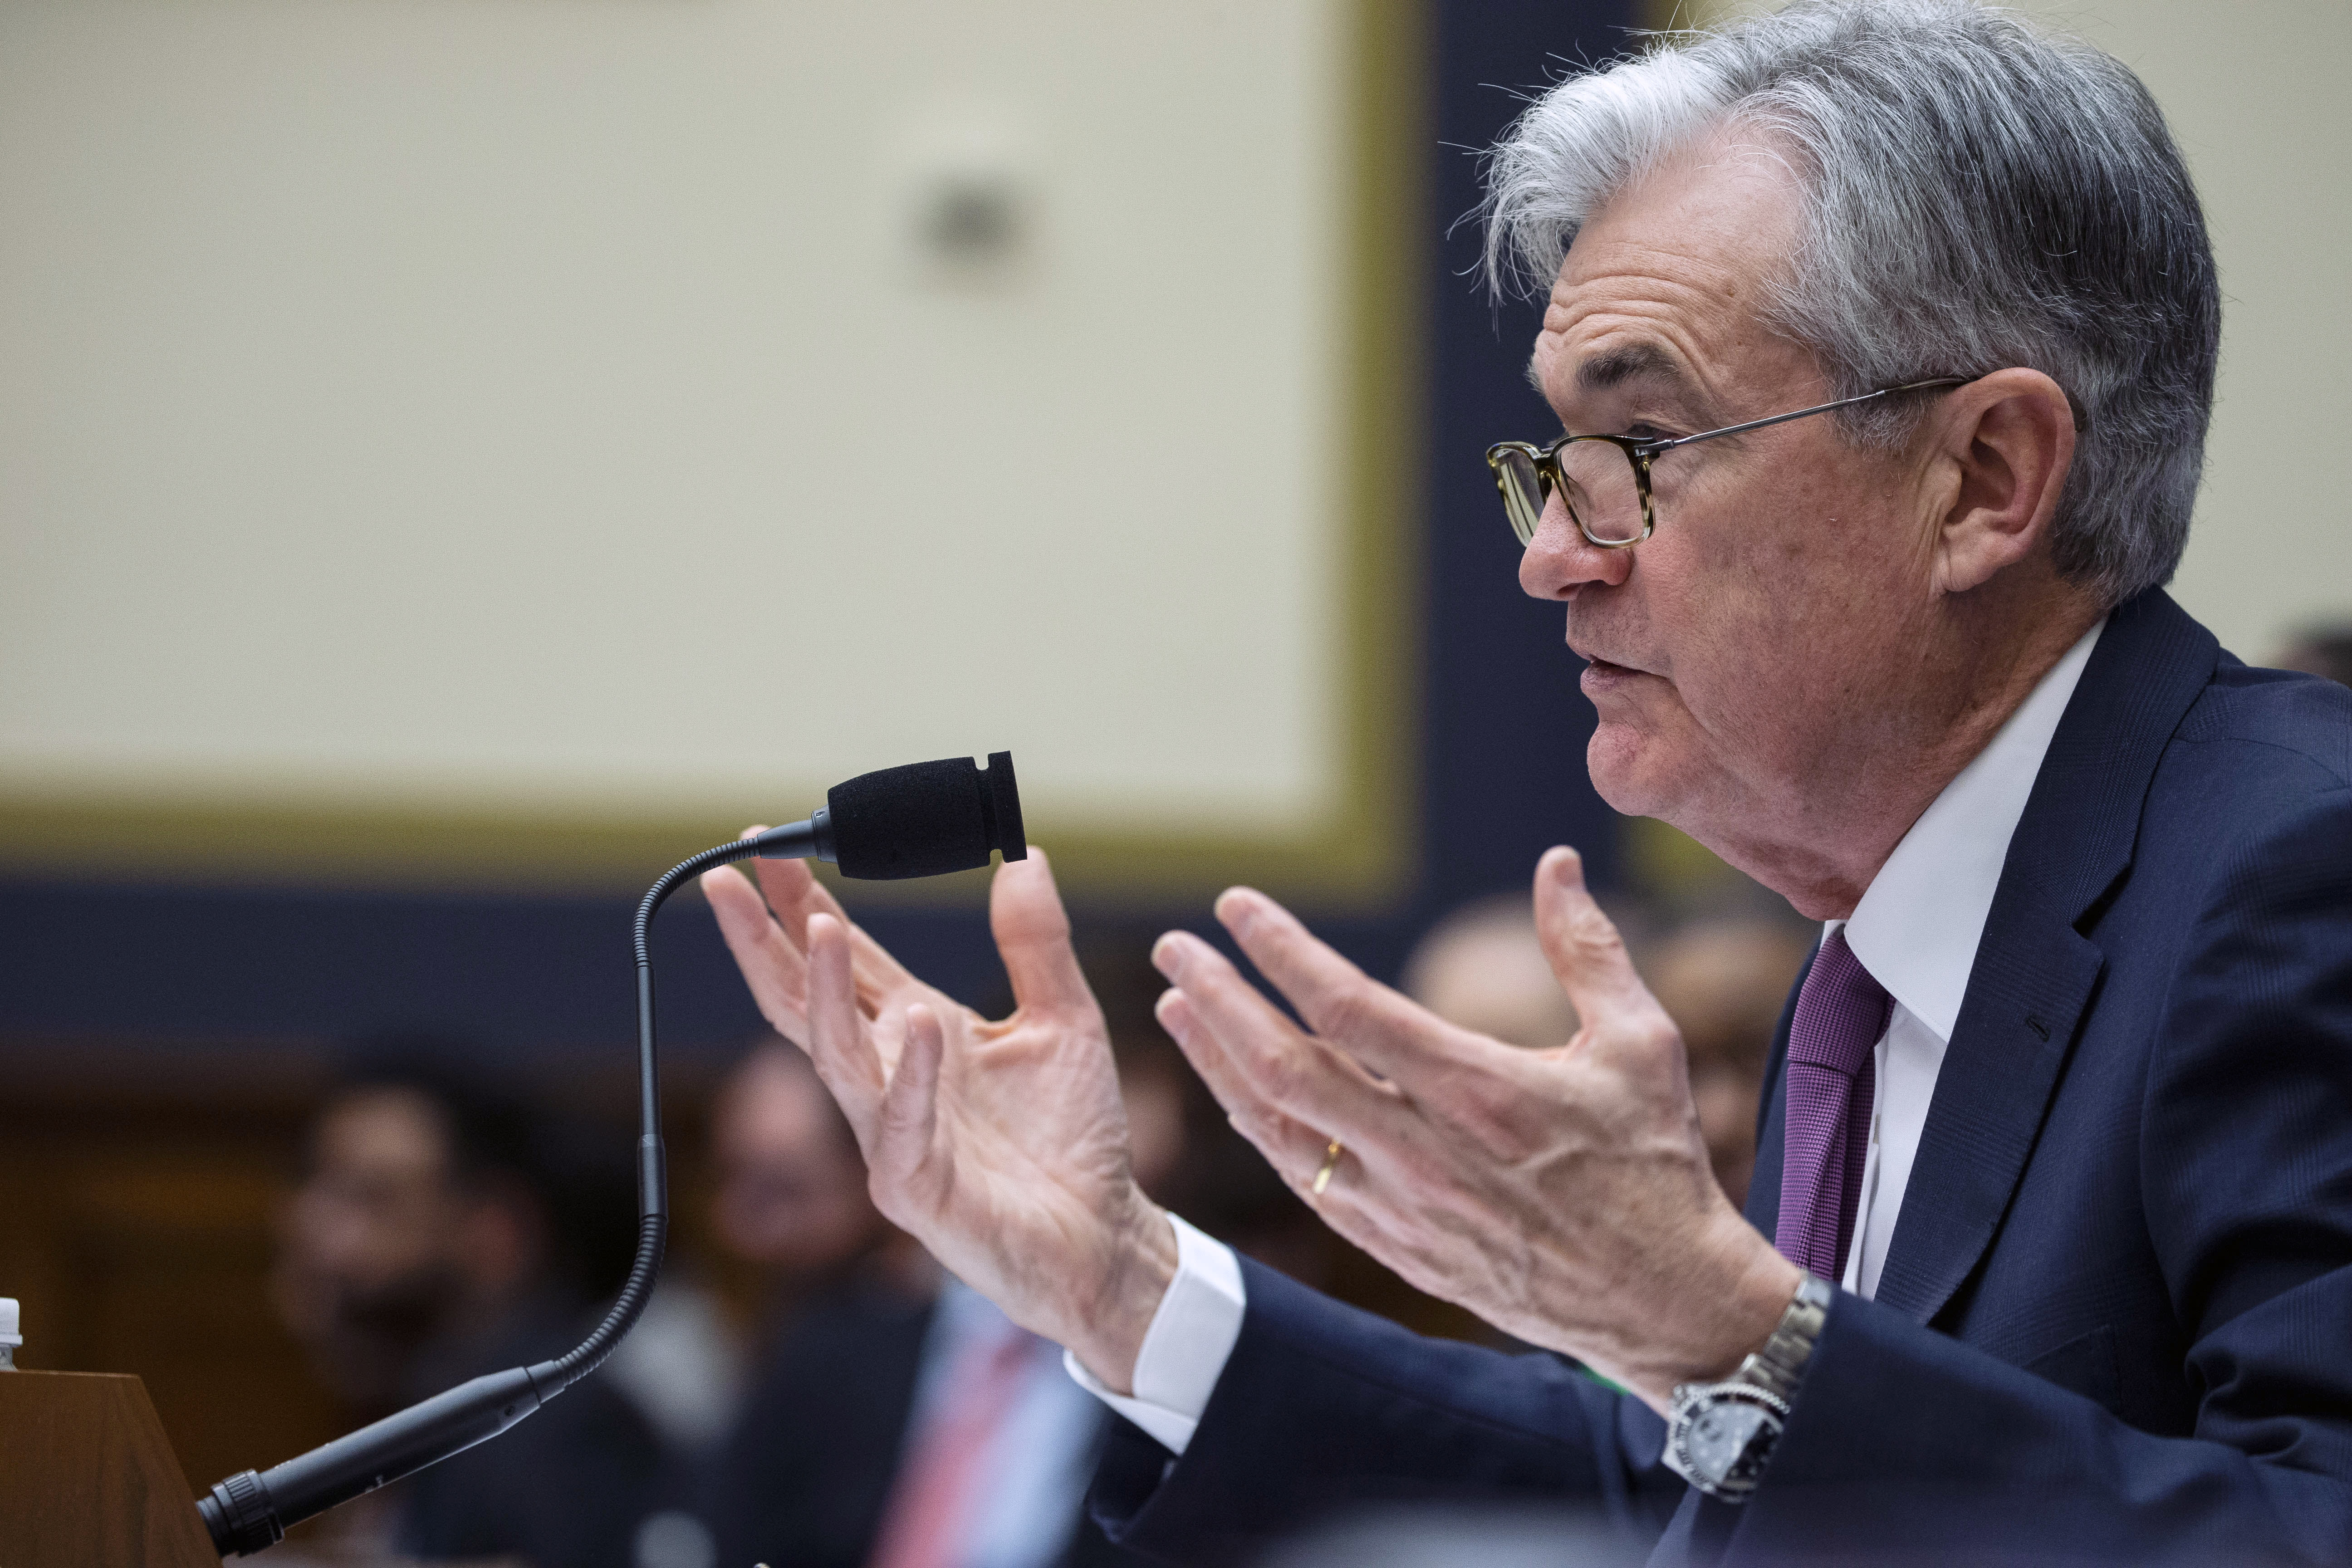 Fed Chair Jay Powell grilled on China's cryptocurrency plans, US response